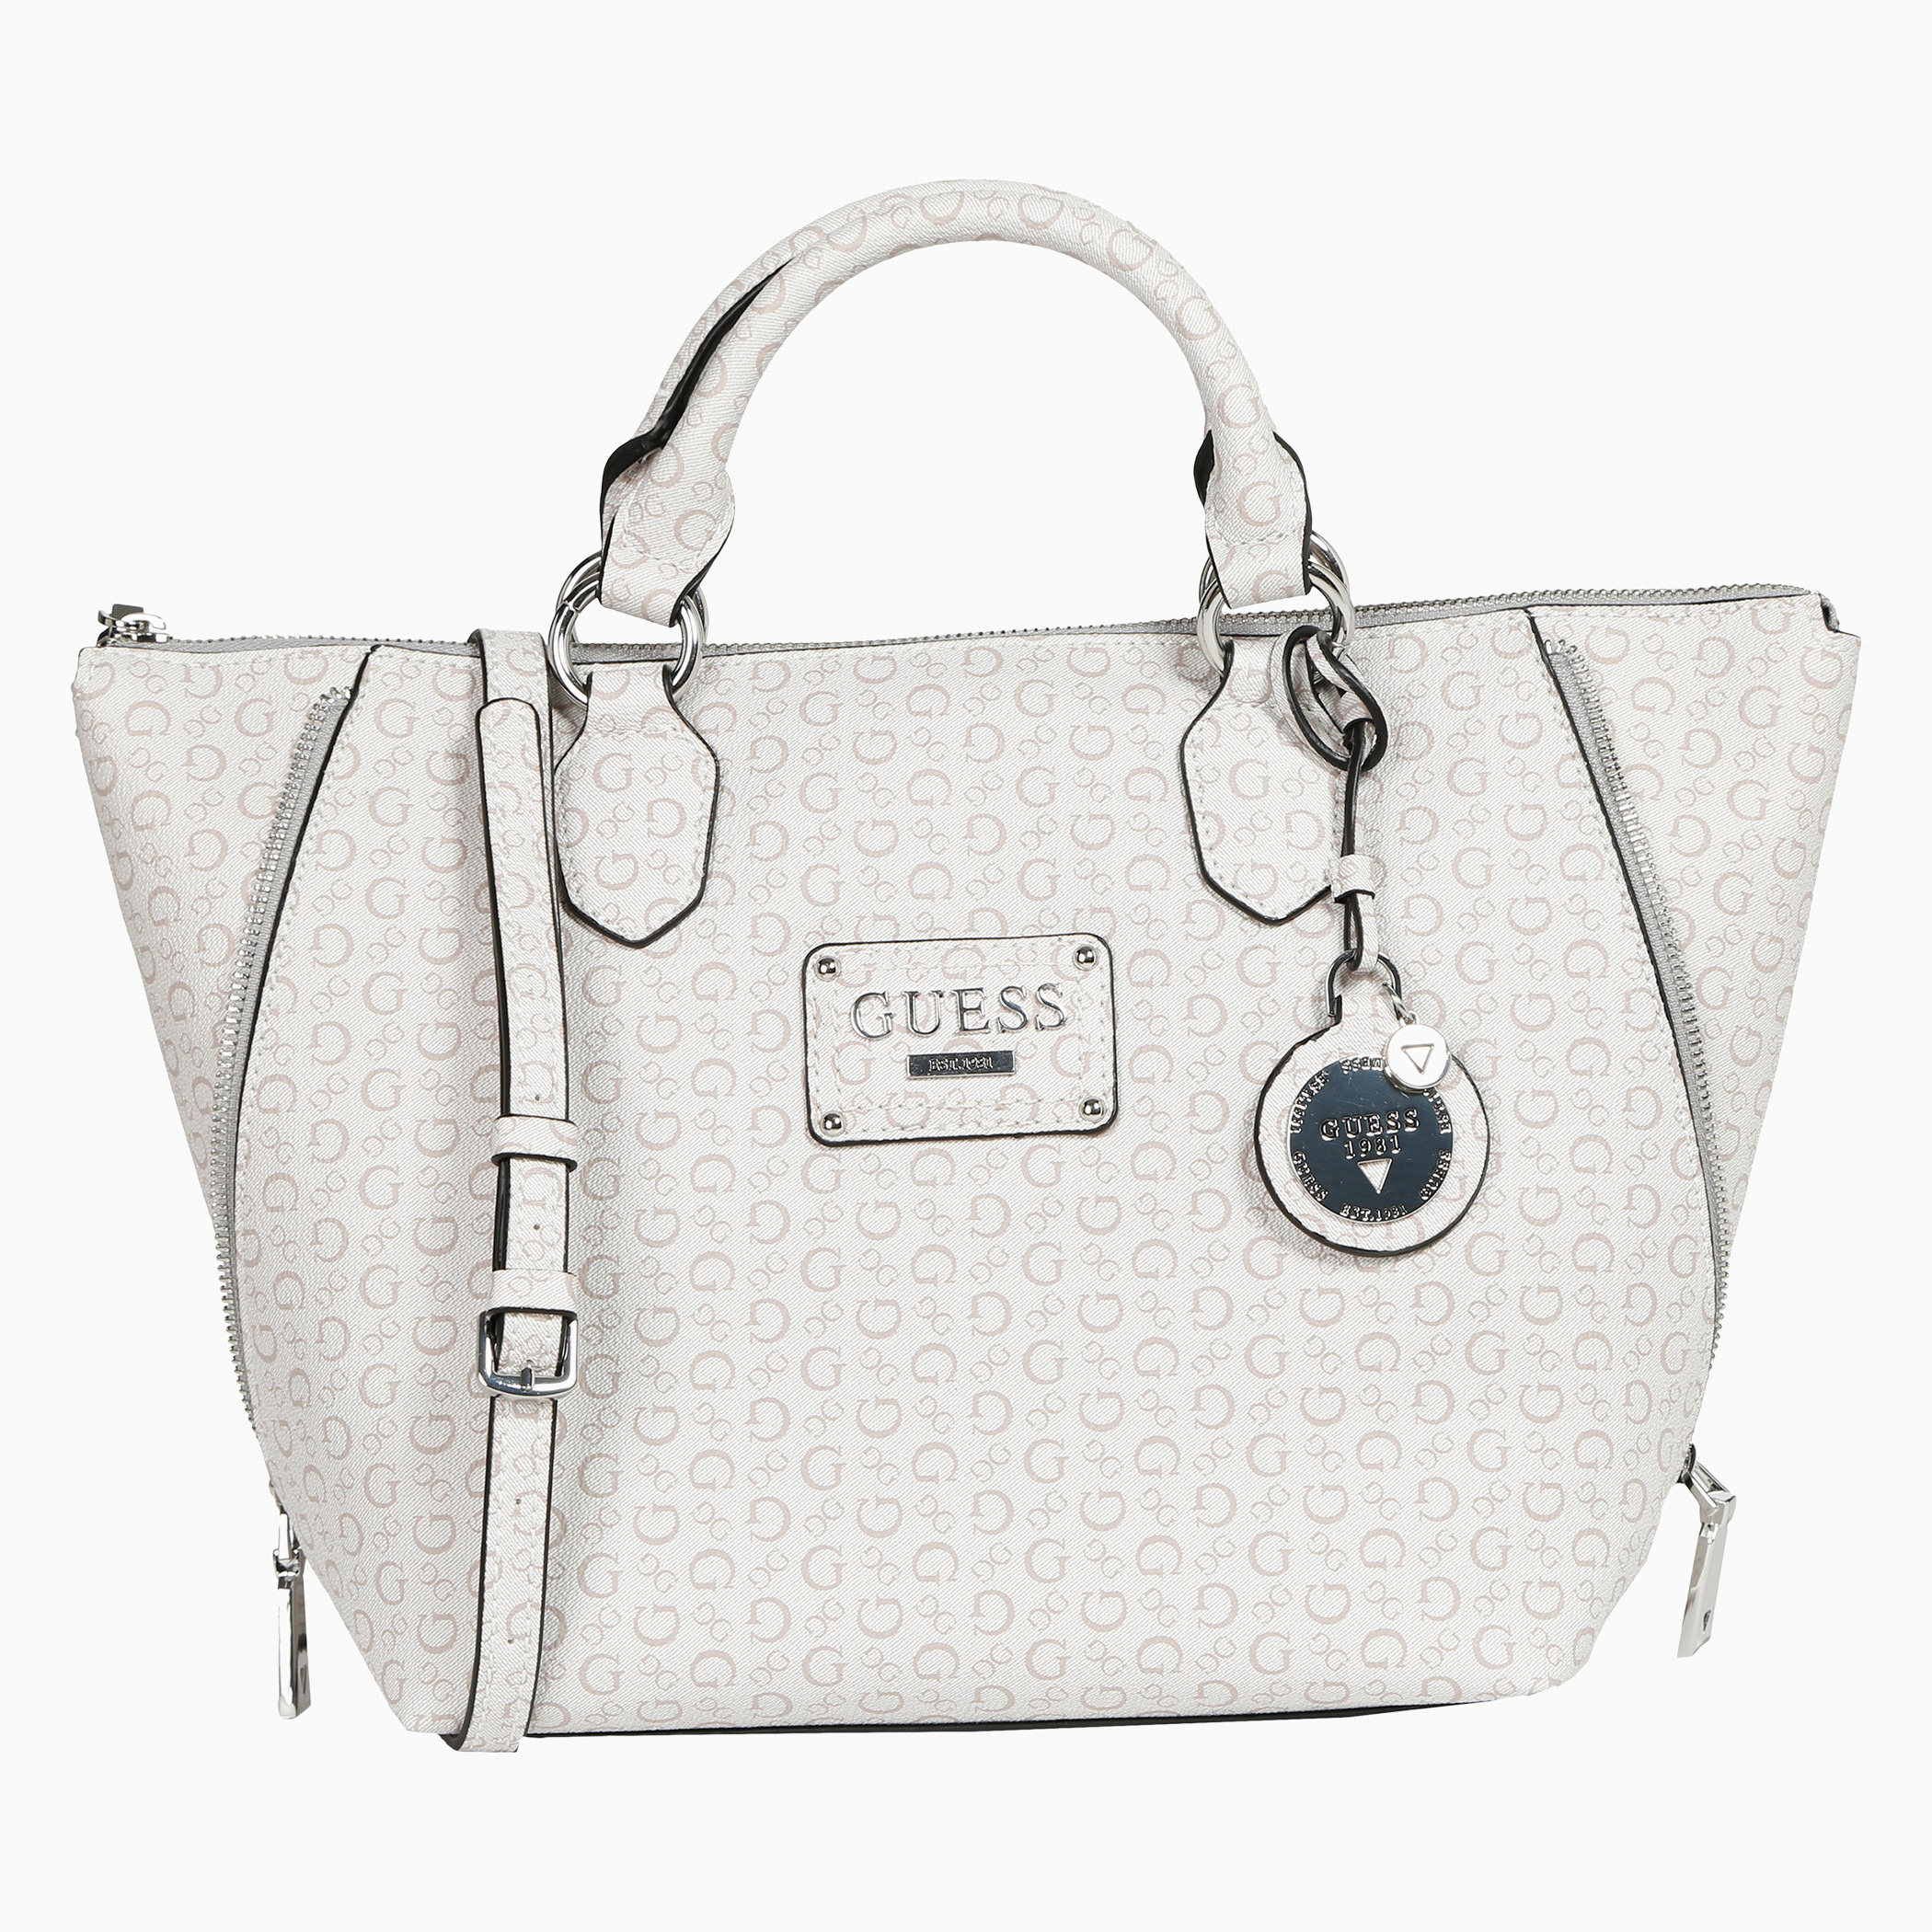 GUESS handbag Daily Pouch Coal Logo | Buy bags, purses & accessories online  | modeherz